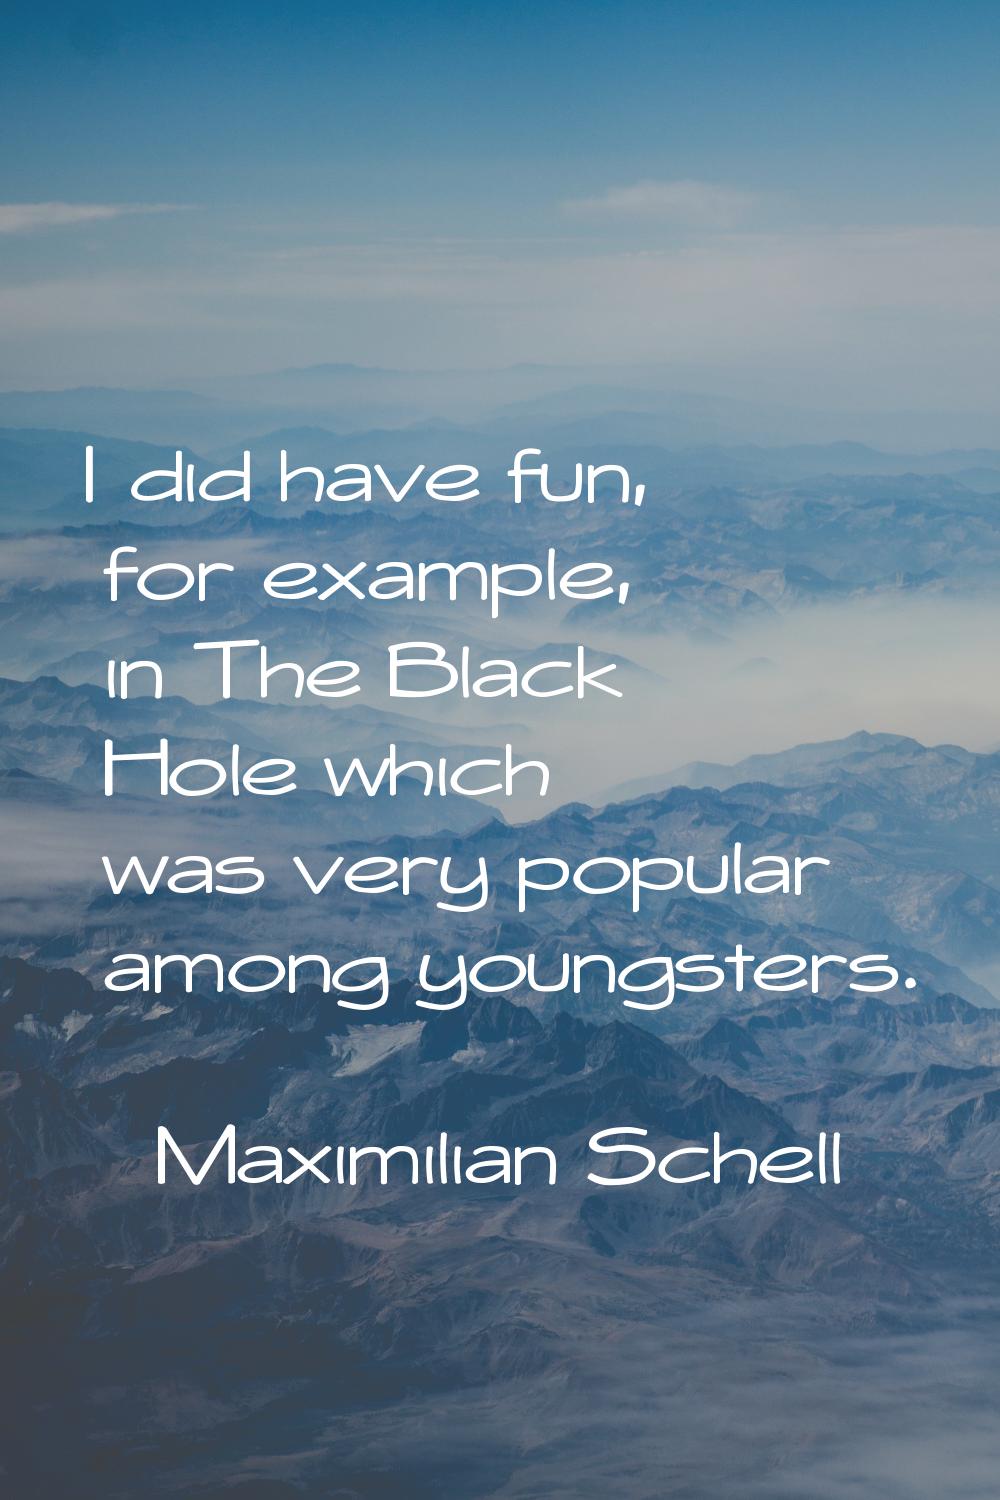 I did have fun, for example, in The Black Hole which was very popular among youngsters.